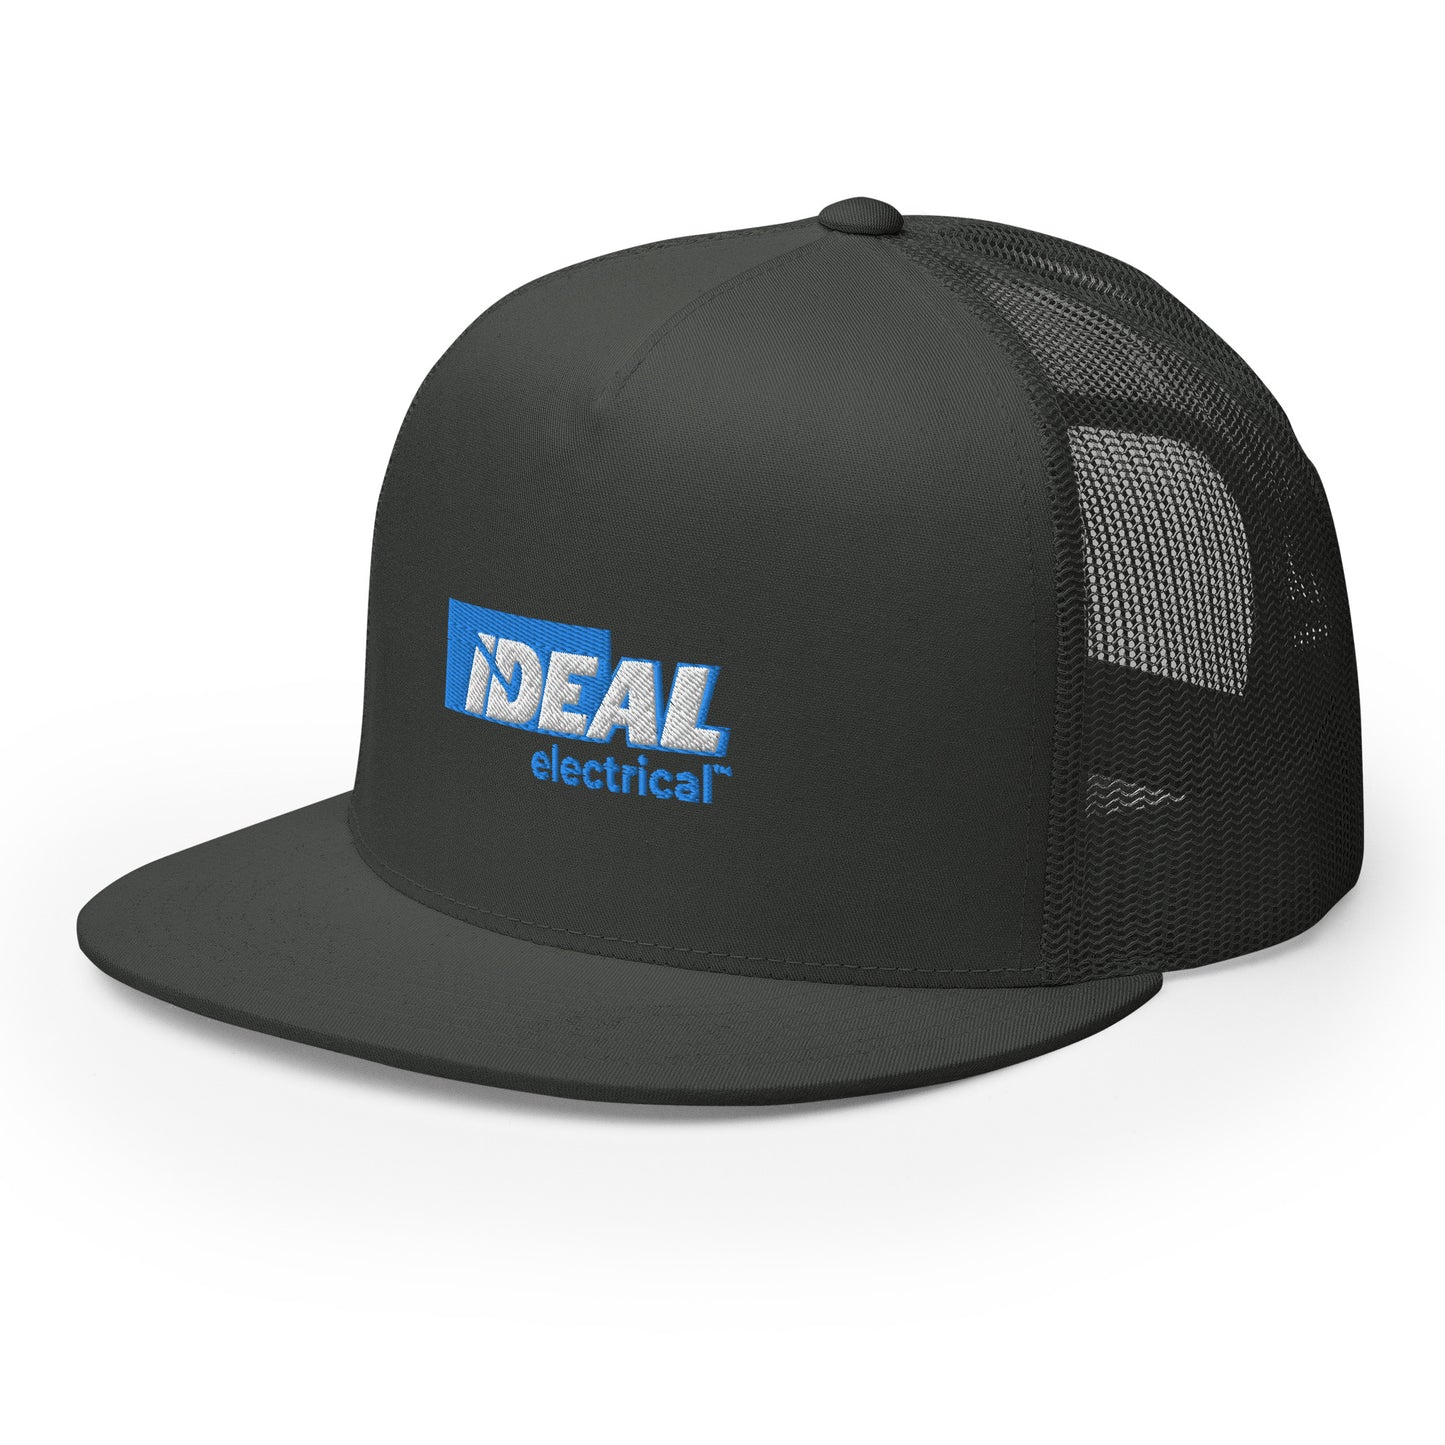 IDEAL Electrical Branded Trucker Cap with Embroidered Logo